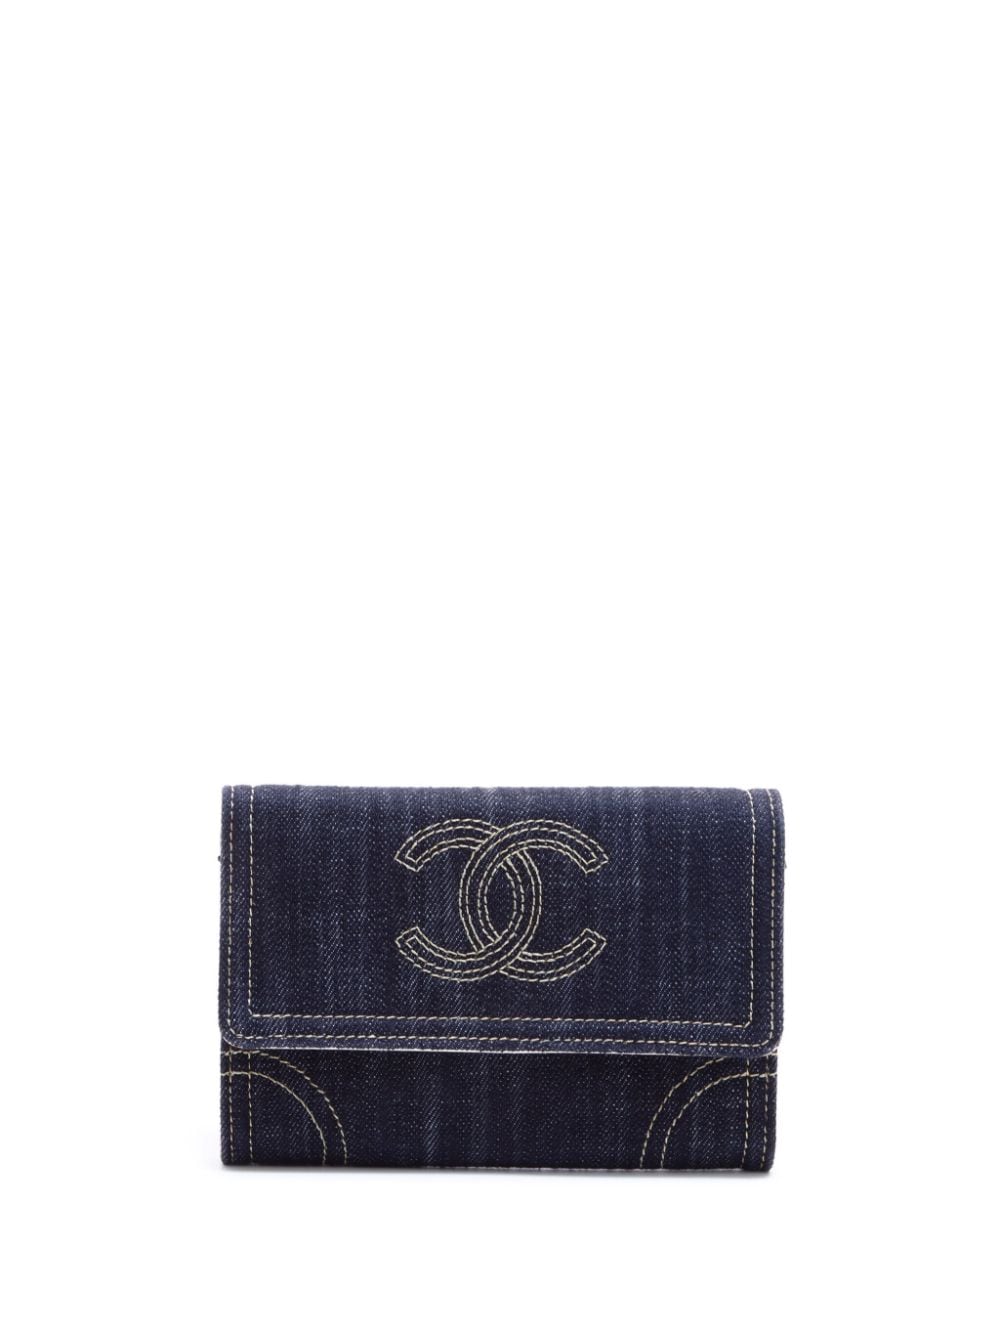 Pre-owned Chanel 2005-2006 Cc Stitch Denim Flap Wallet In Blue